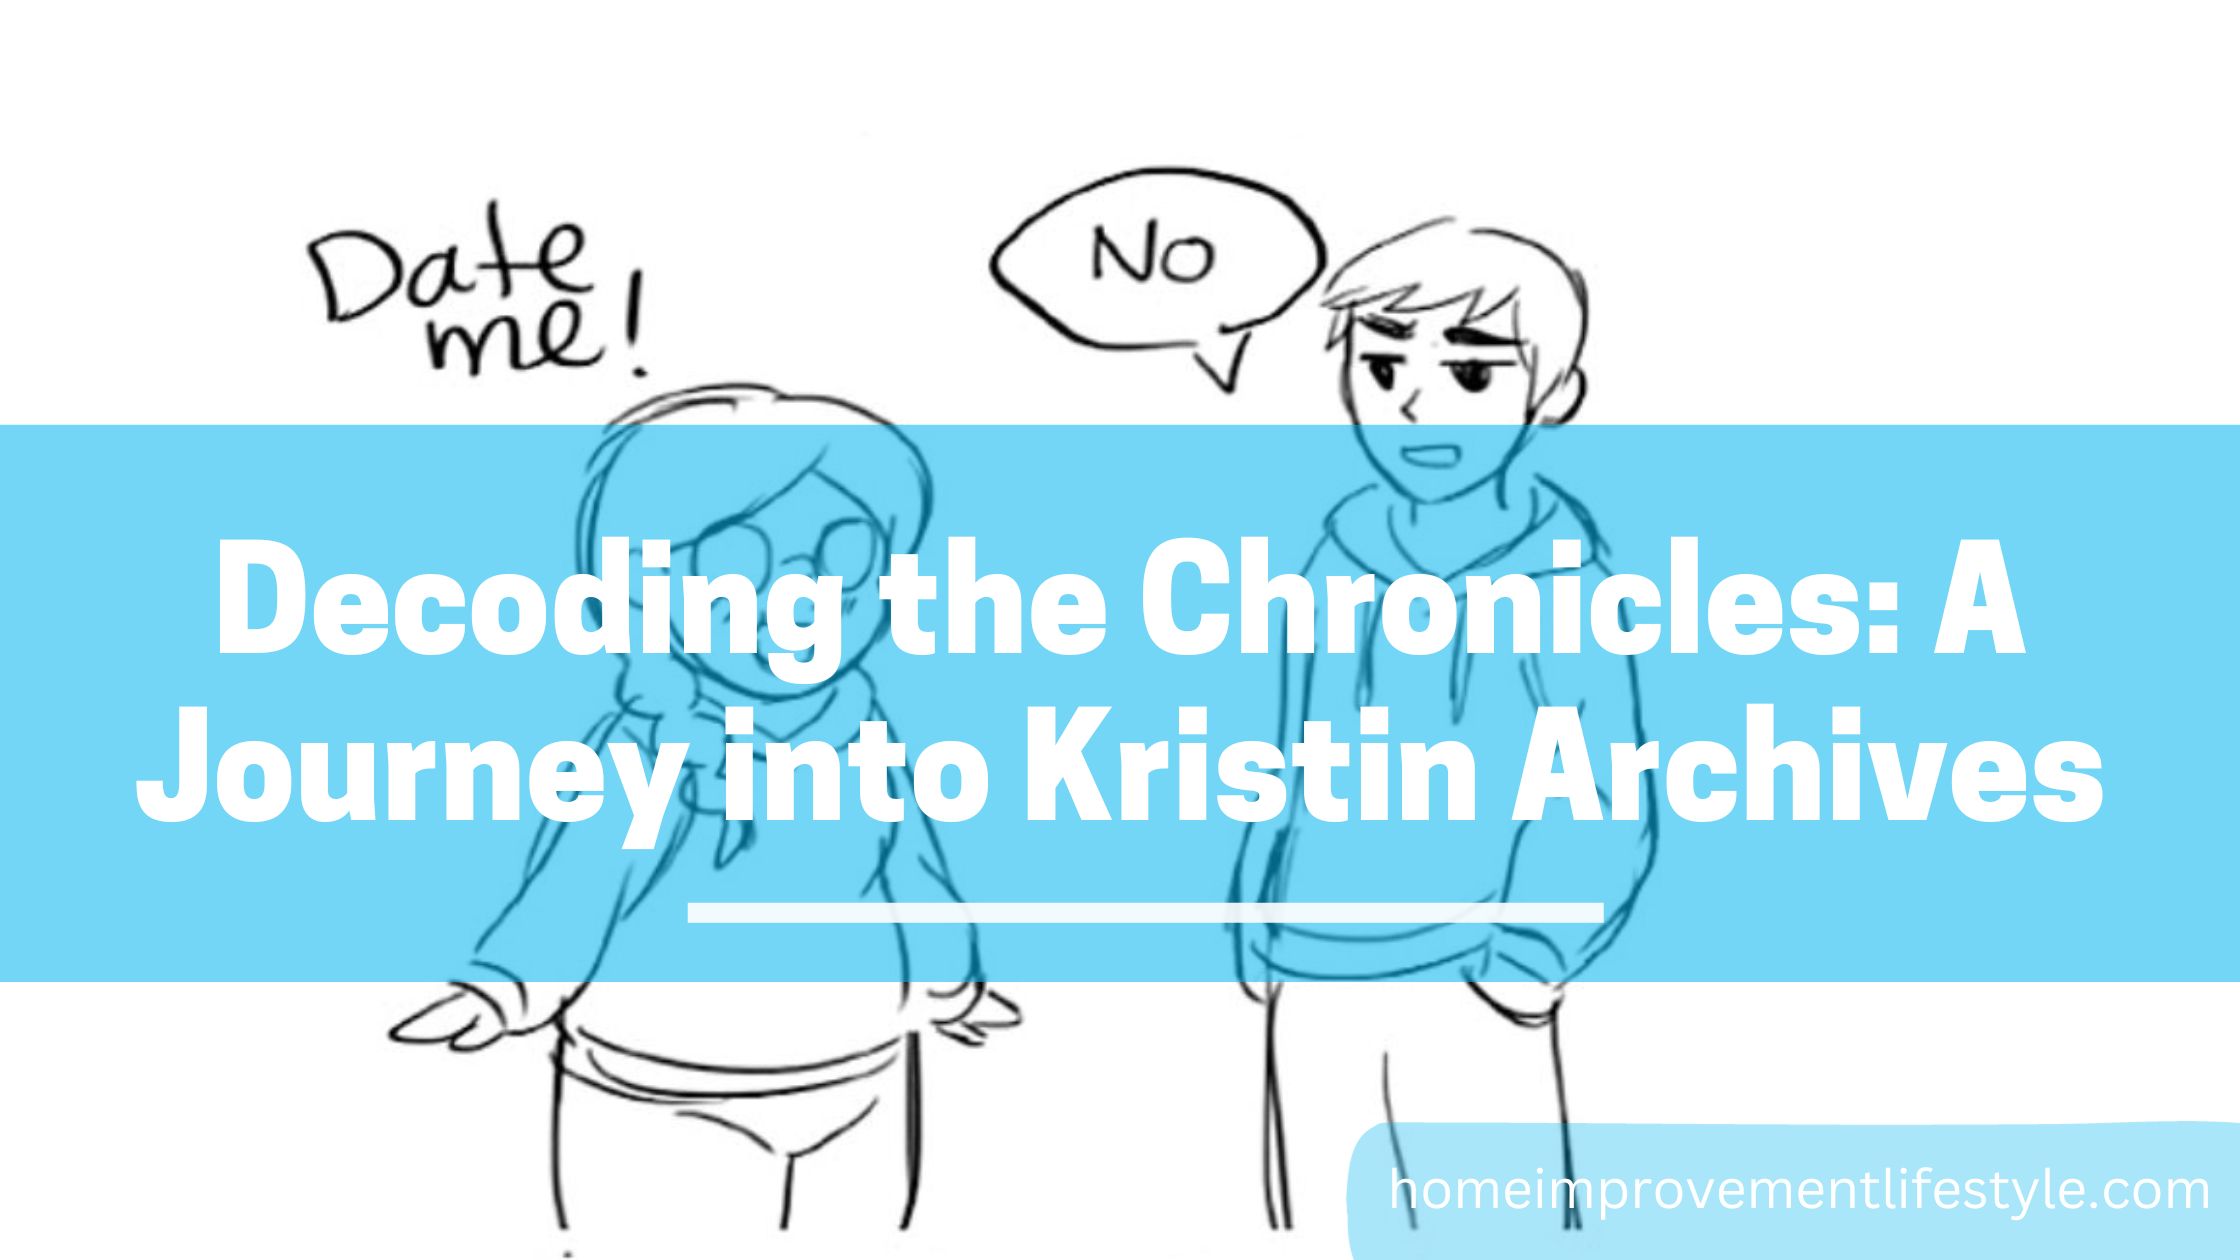 Decoding the Chronicles: A Journey into Kristin Archives